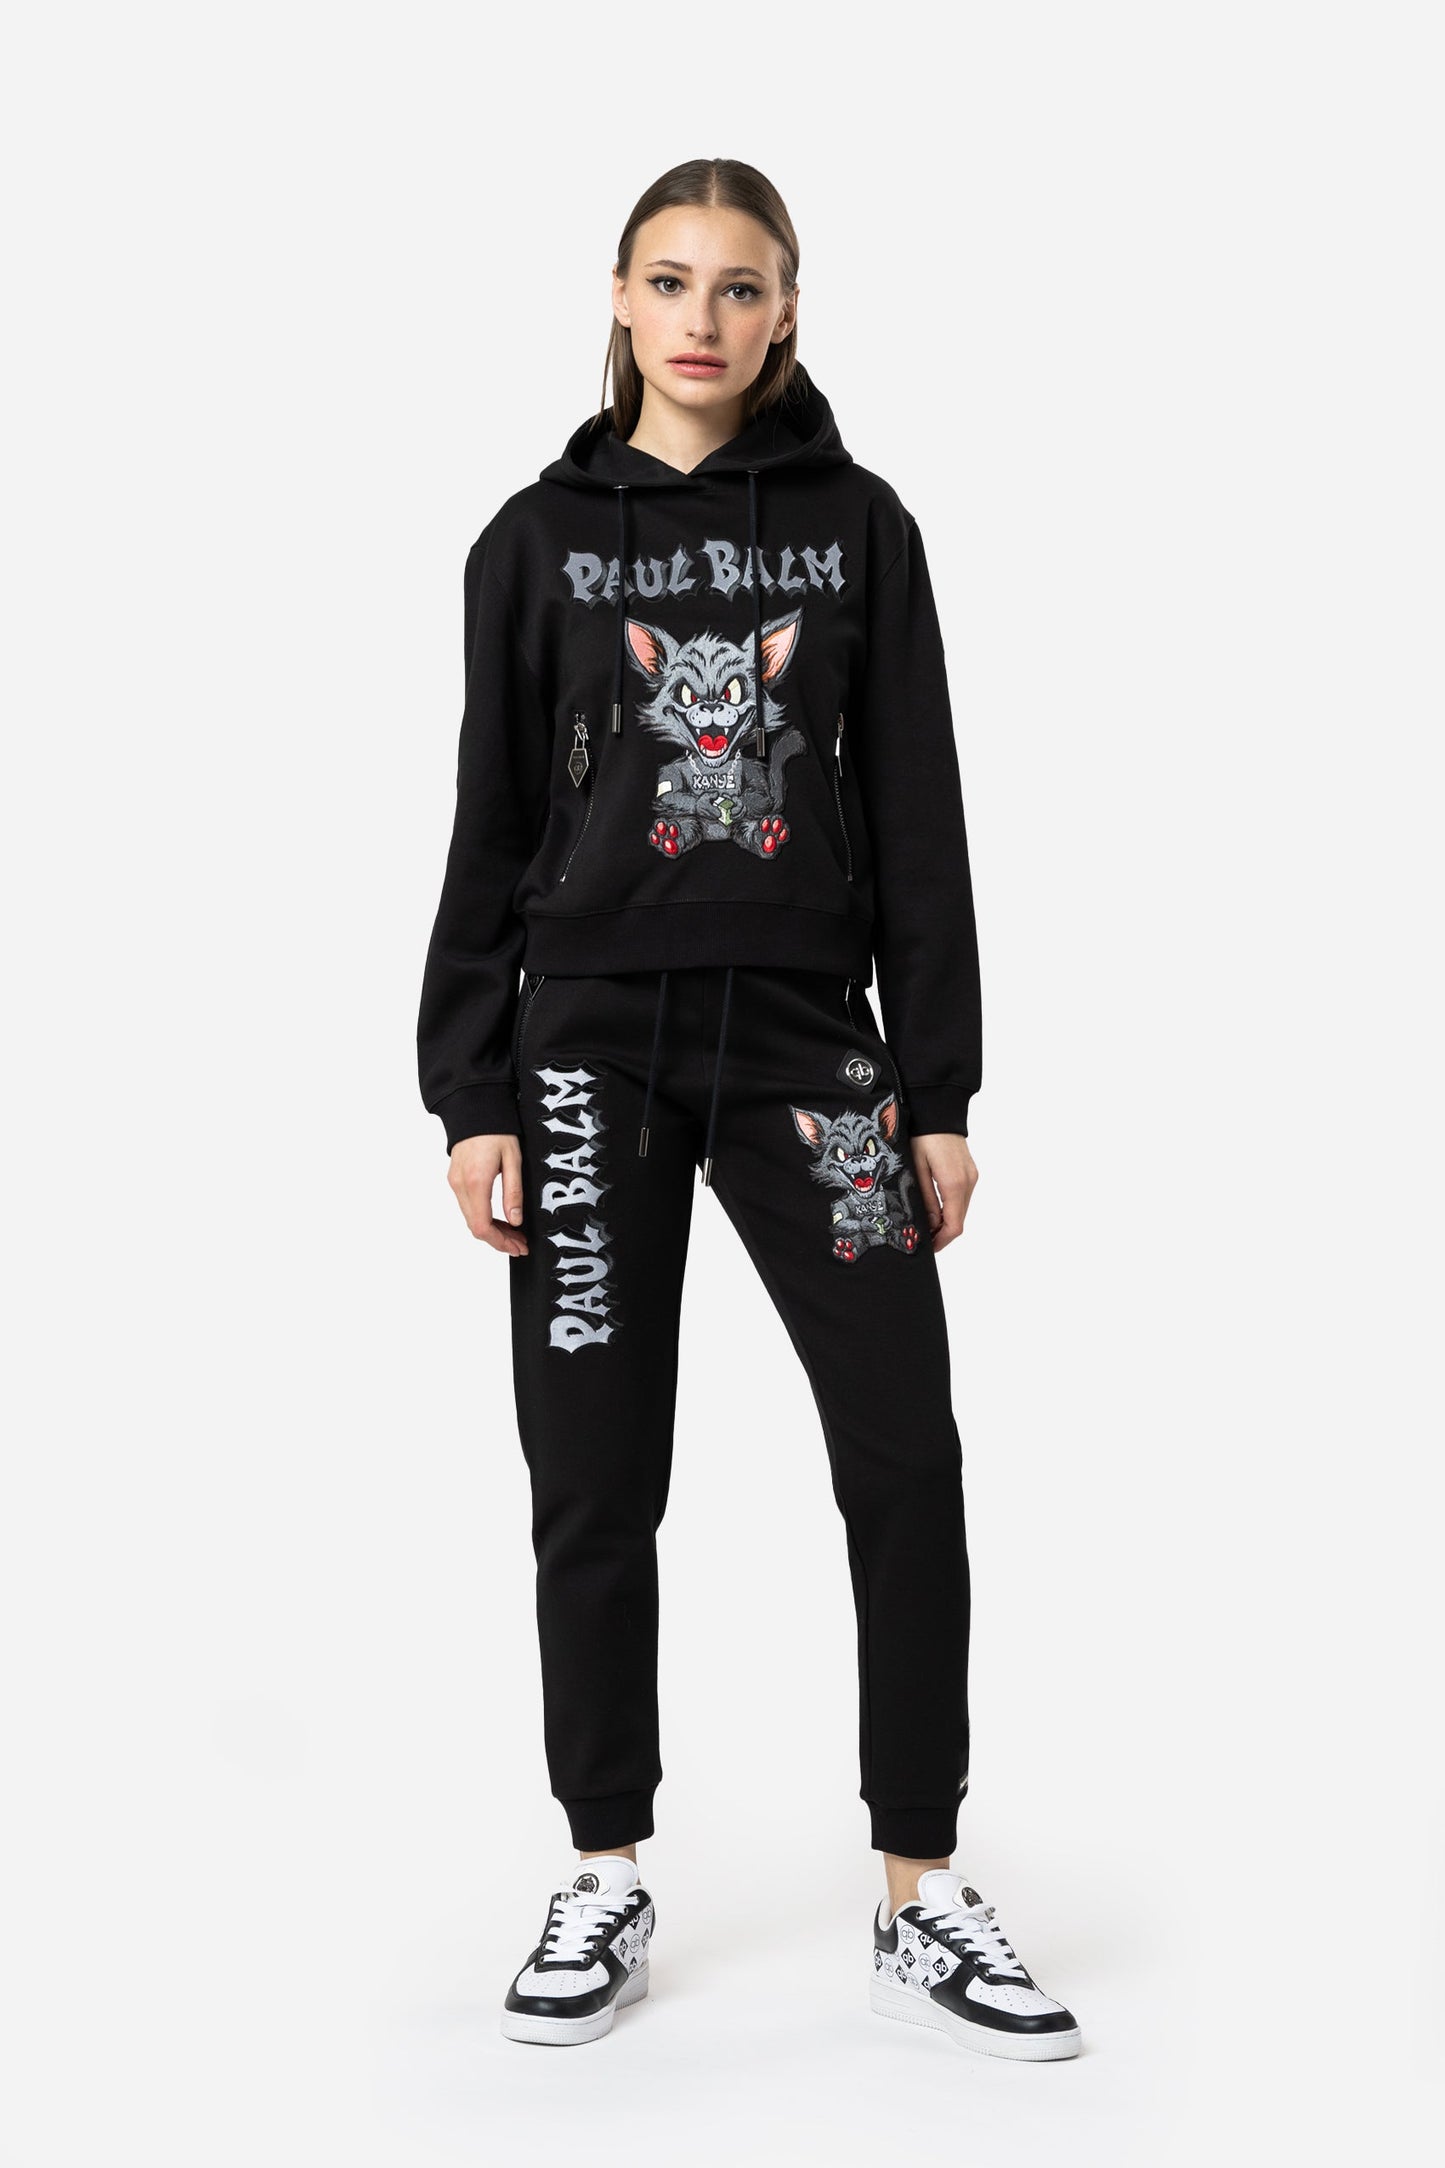 Kanye the Black Cat Embroidery Hoodie - Limited to 300